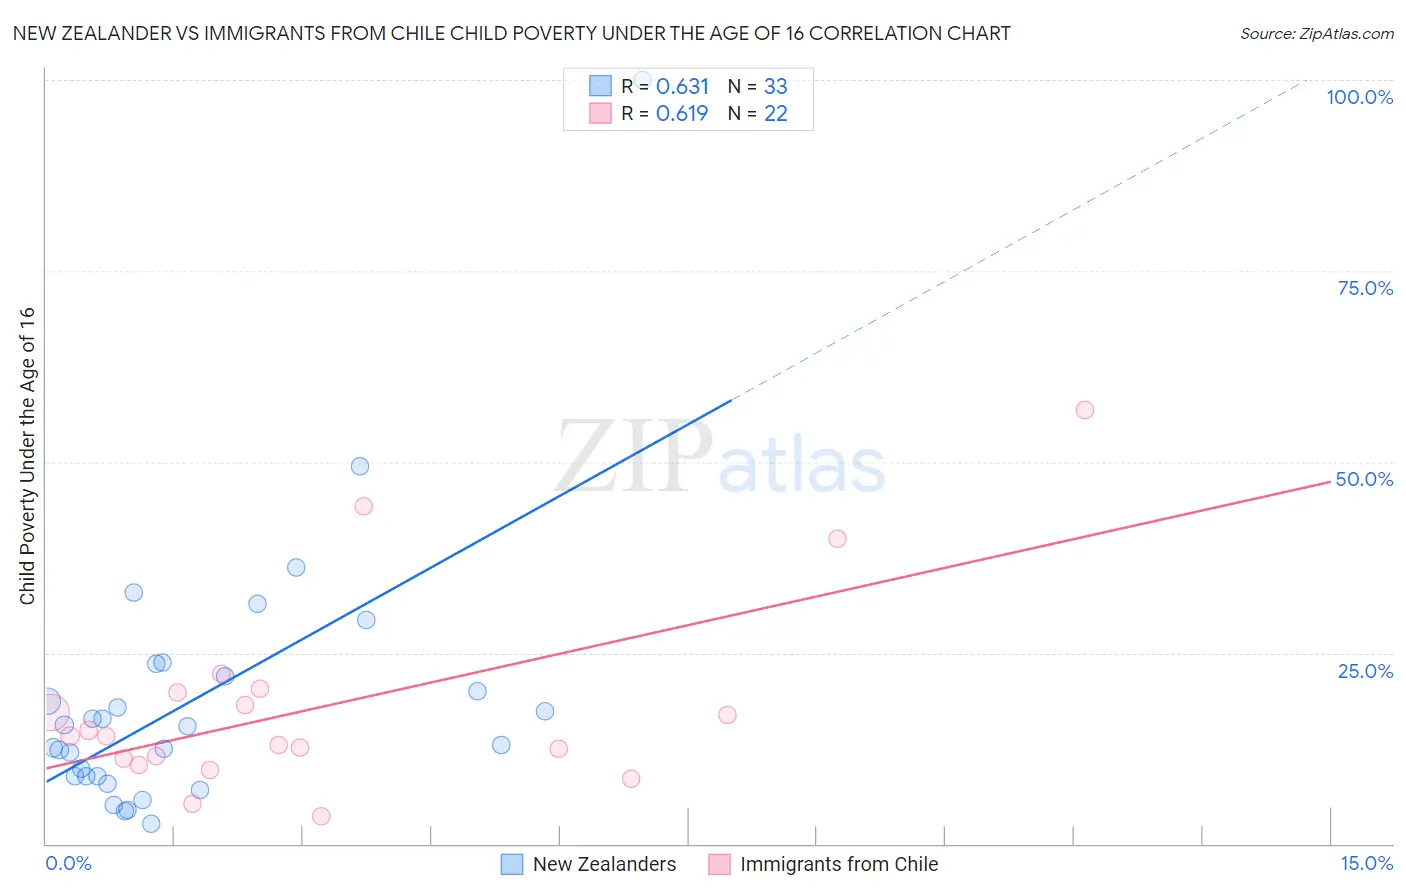 New Zealander vs Immigrants from Chile Child Poverty Under the Age of 16